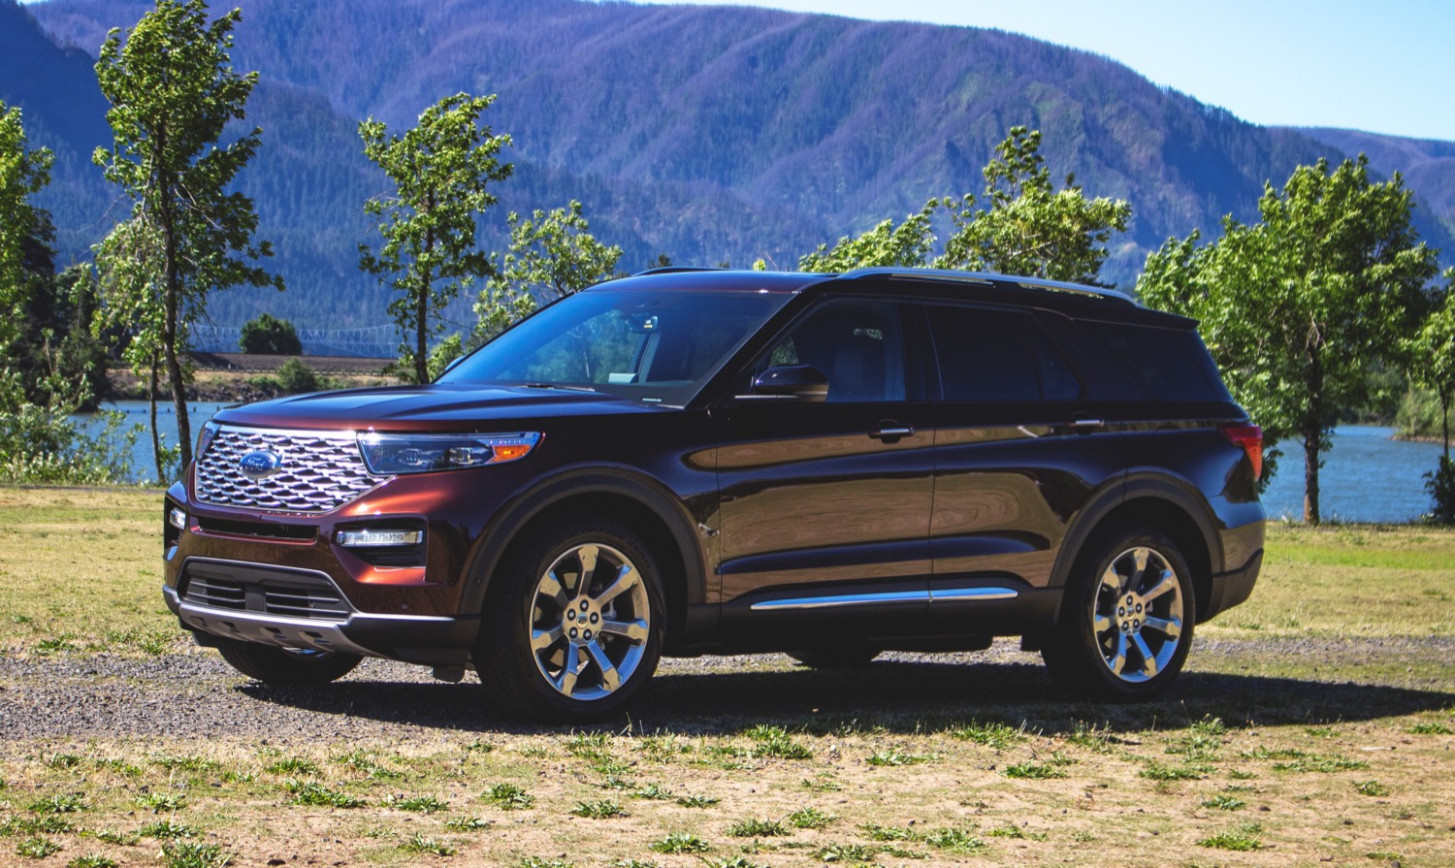 Model When Does The 2023 Ford Explorer Come Out